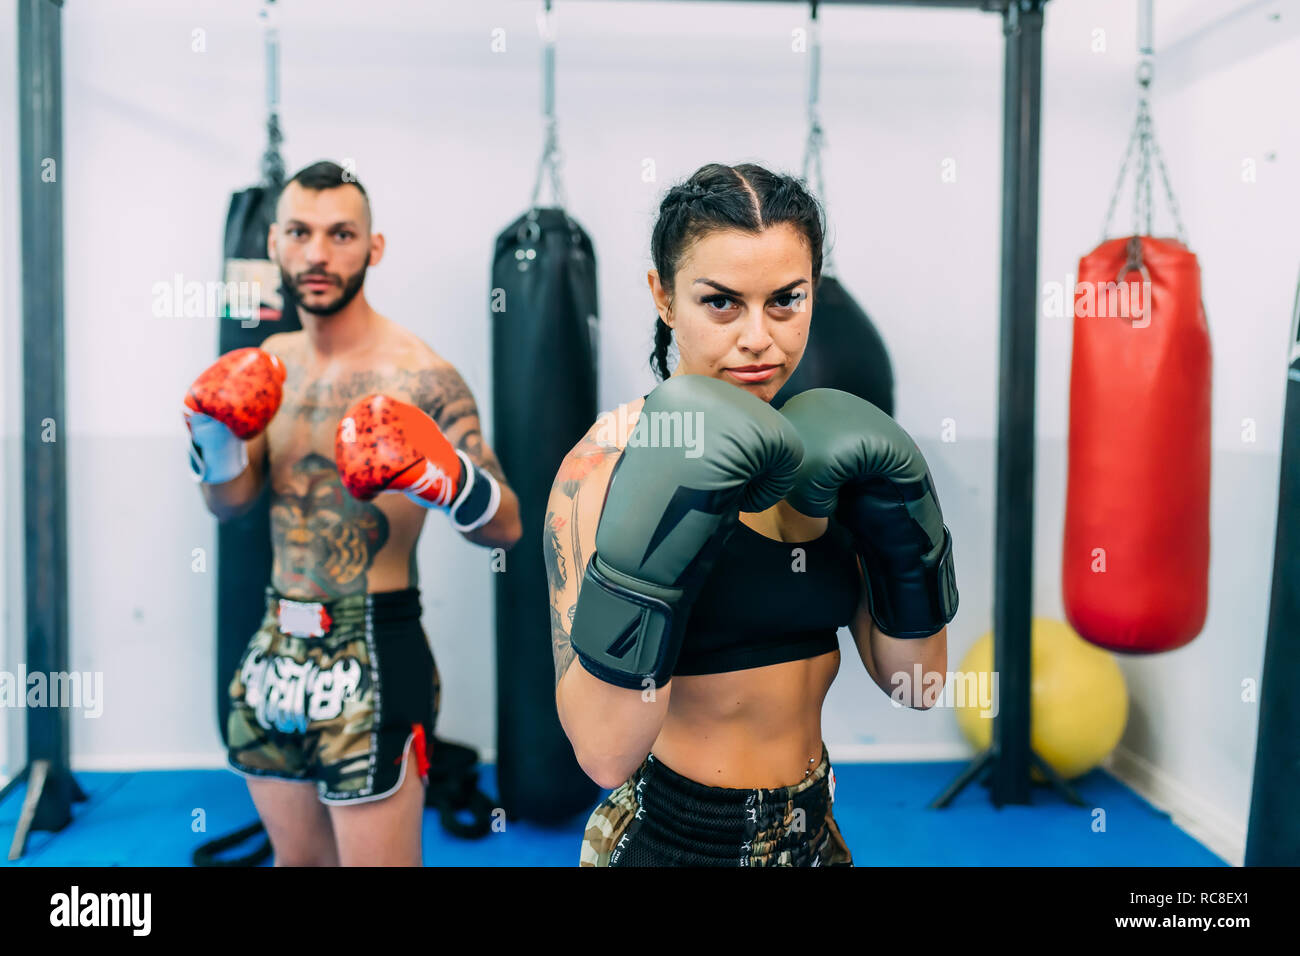 Portrait of male and female boxers Stock Photo